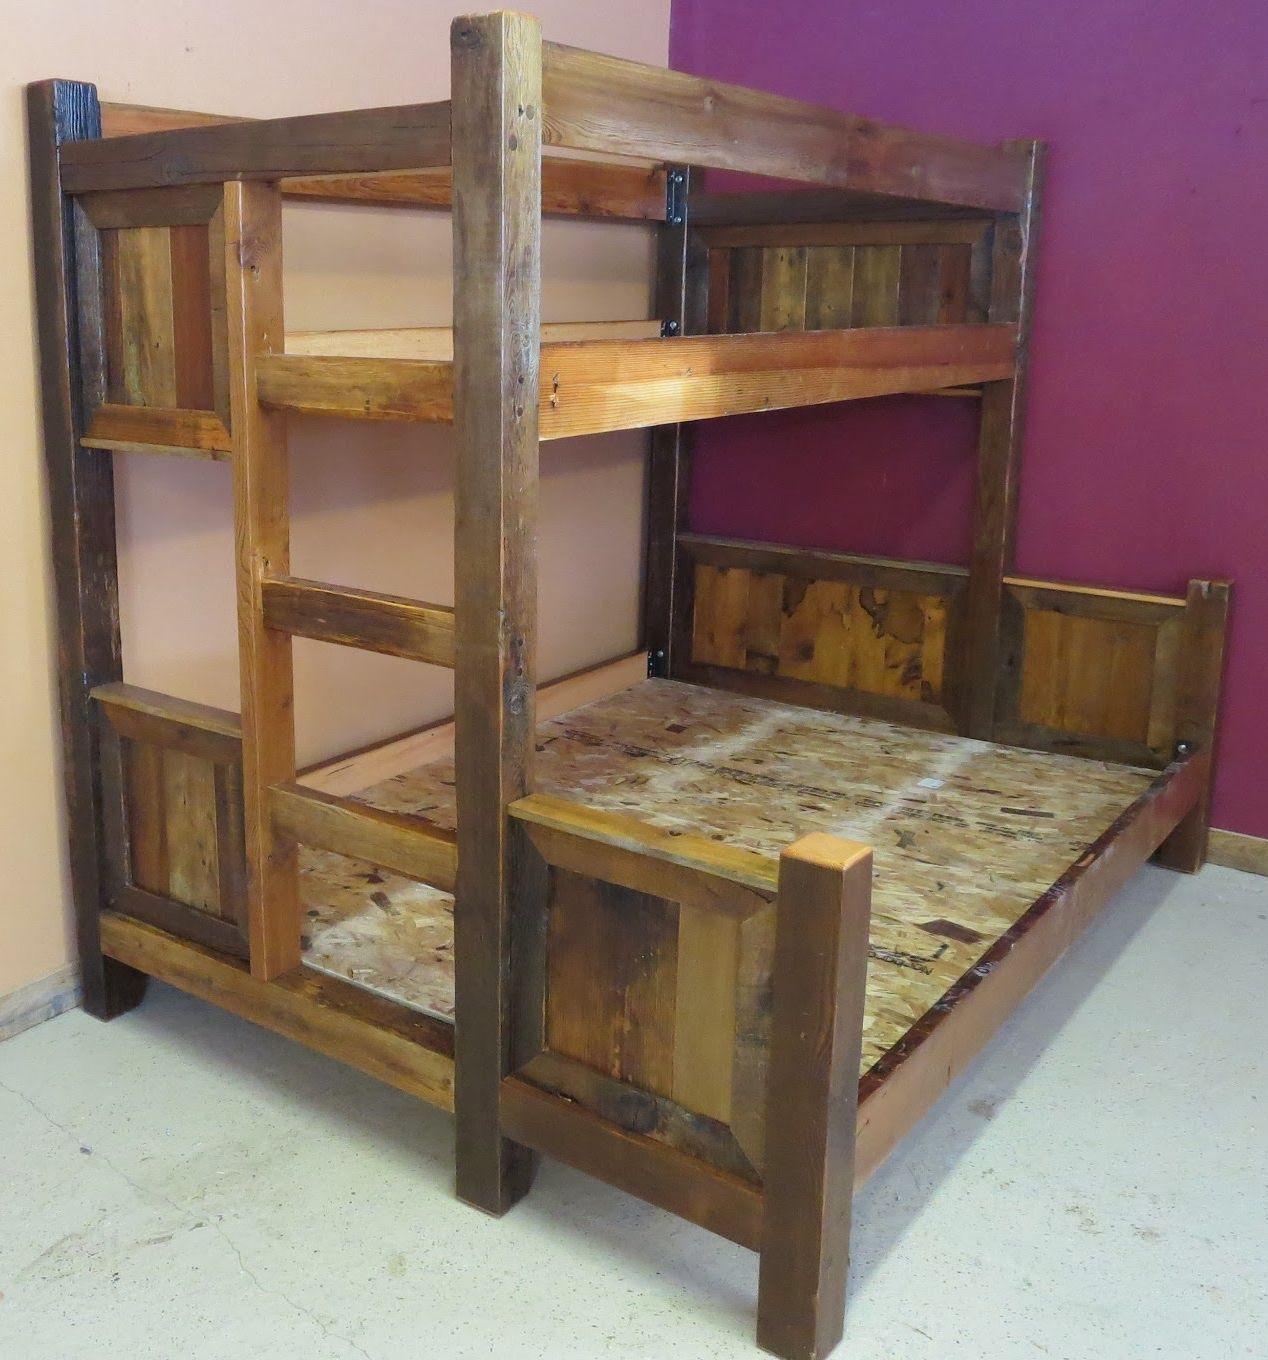 rustic bunk beds twin over full